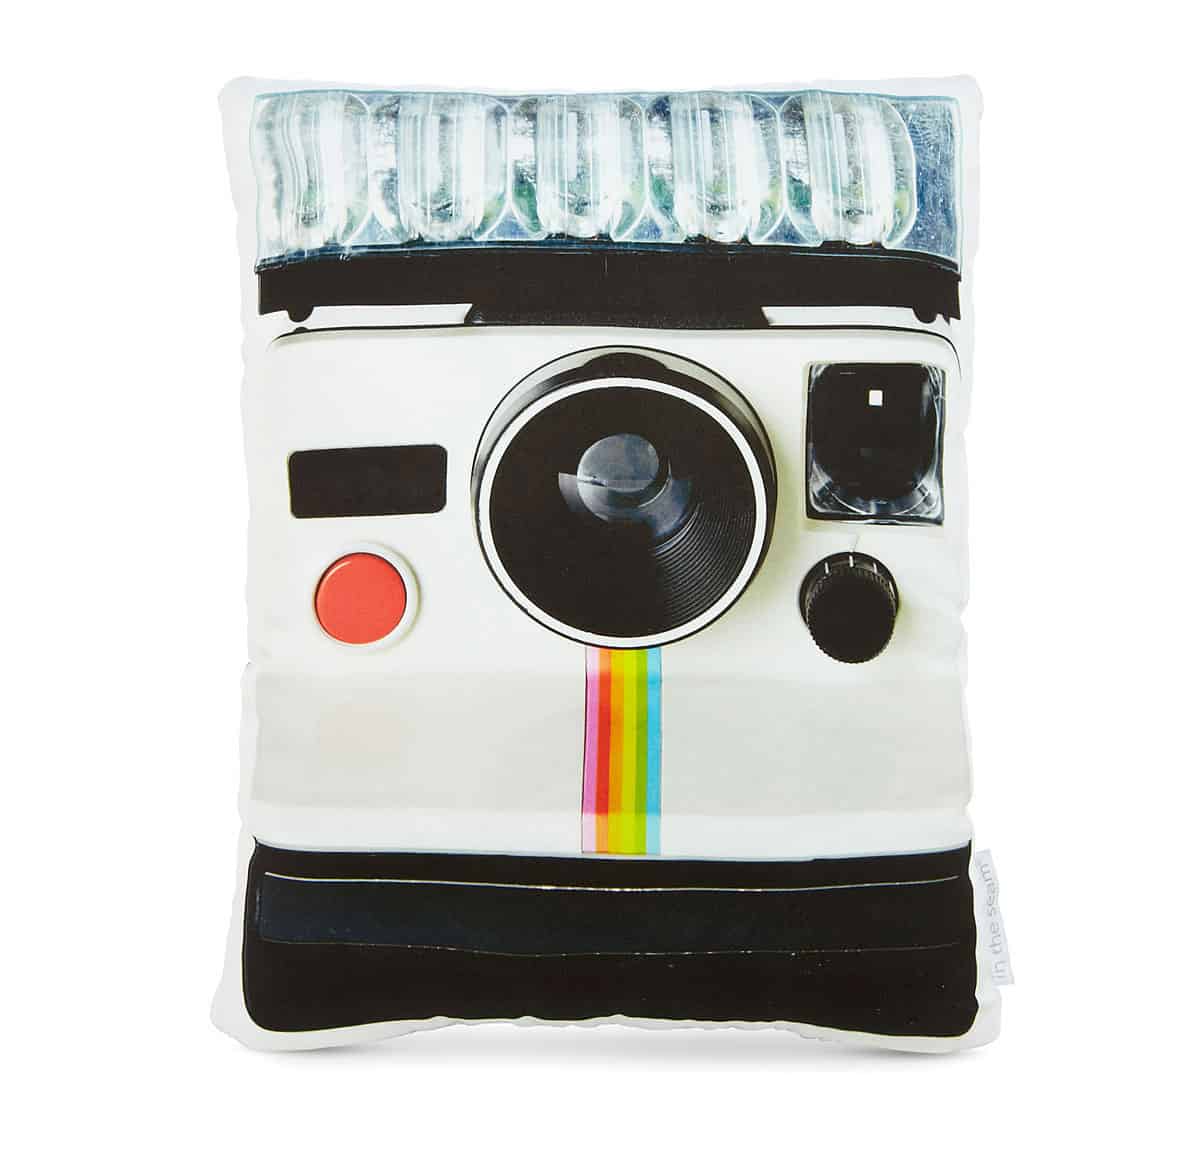 In the seem Vintage Camera Pillows Interesting Home Product